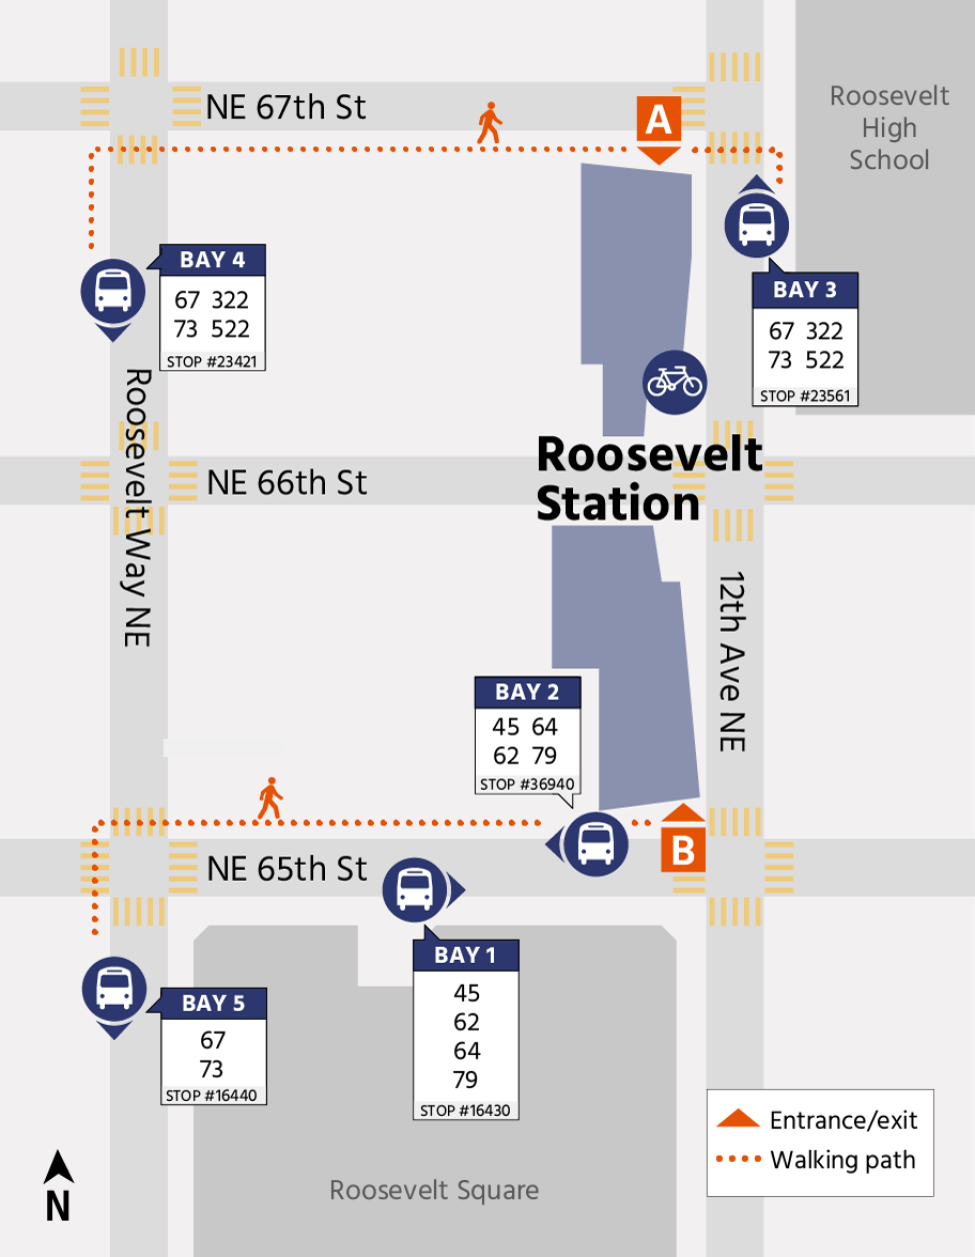 Map illustrating walking path for transfer from bus to link at the Roosevelt Station.